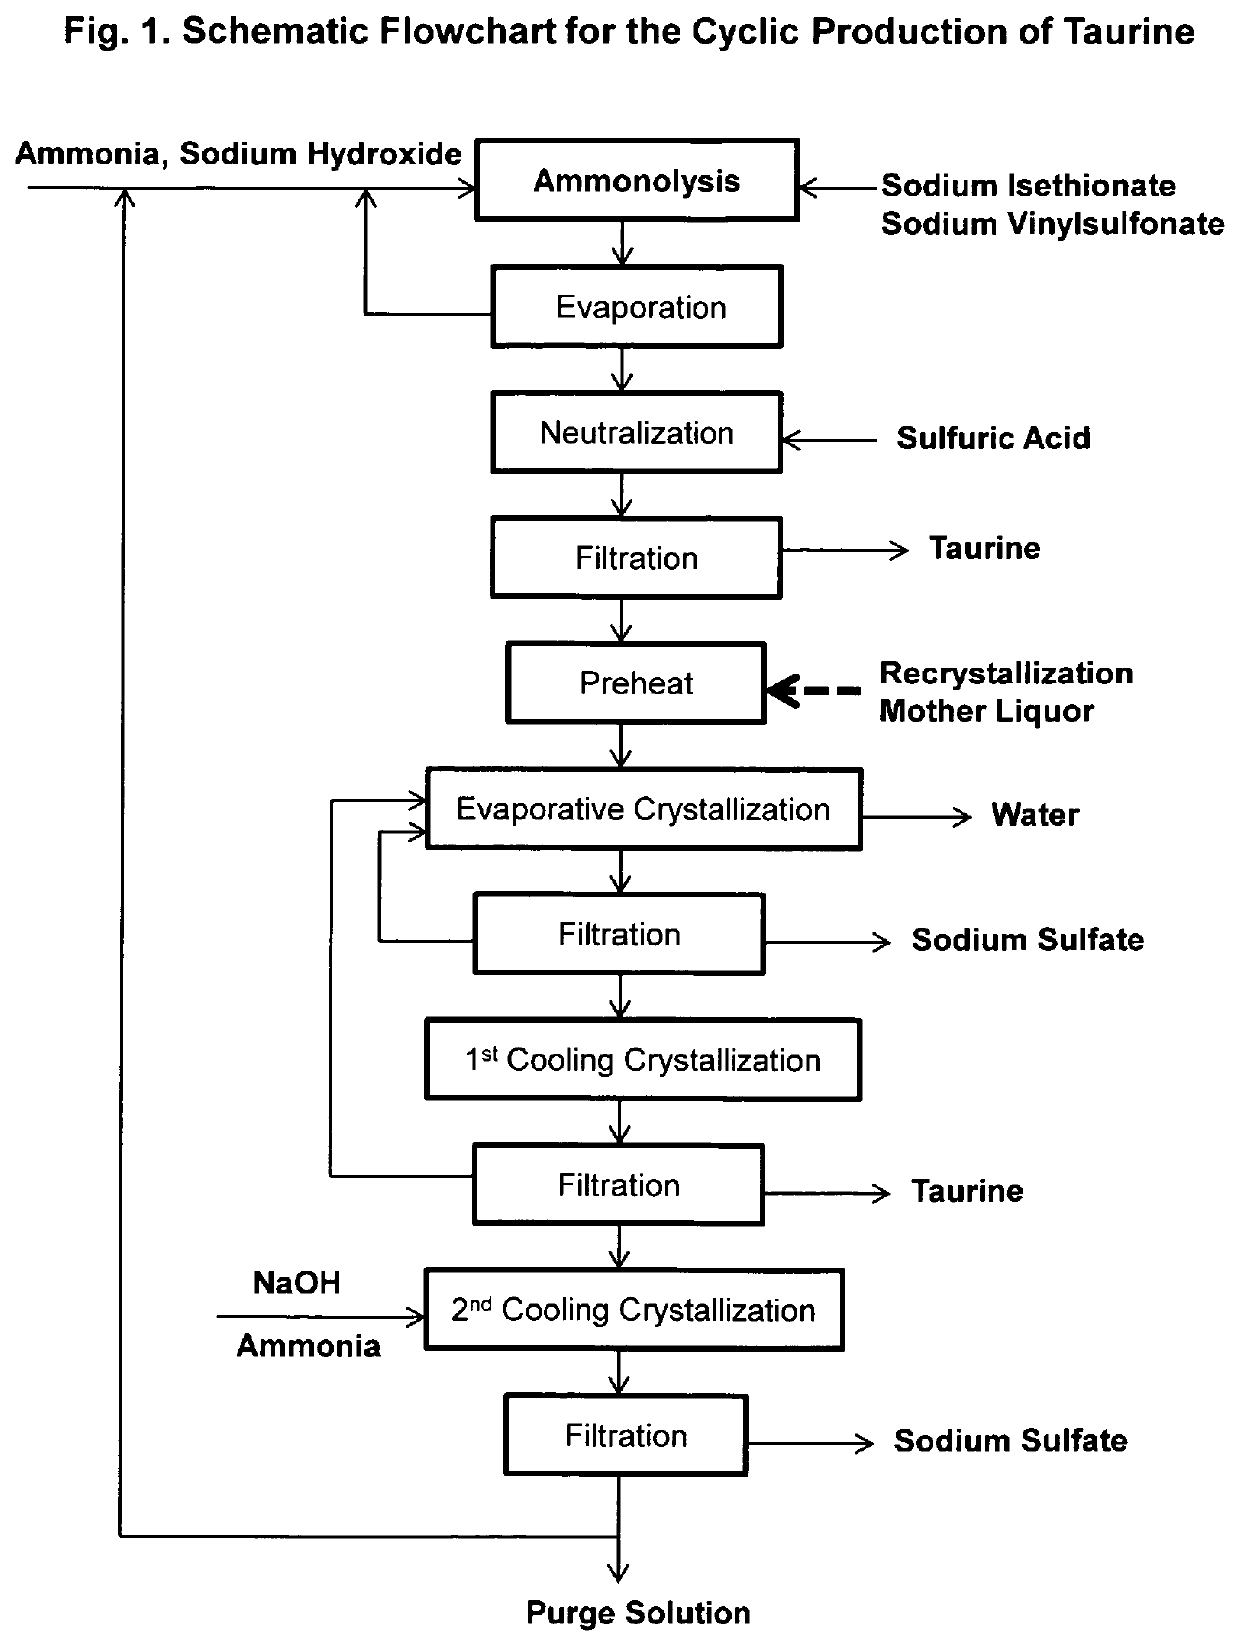 Cyclic process for the production of taurine from alkali isethionate